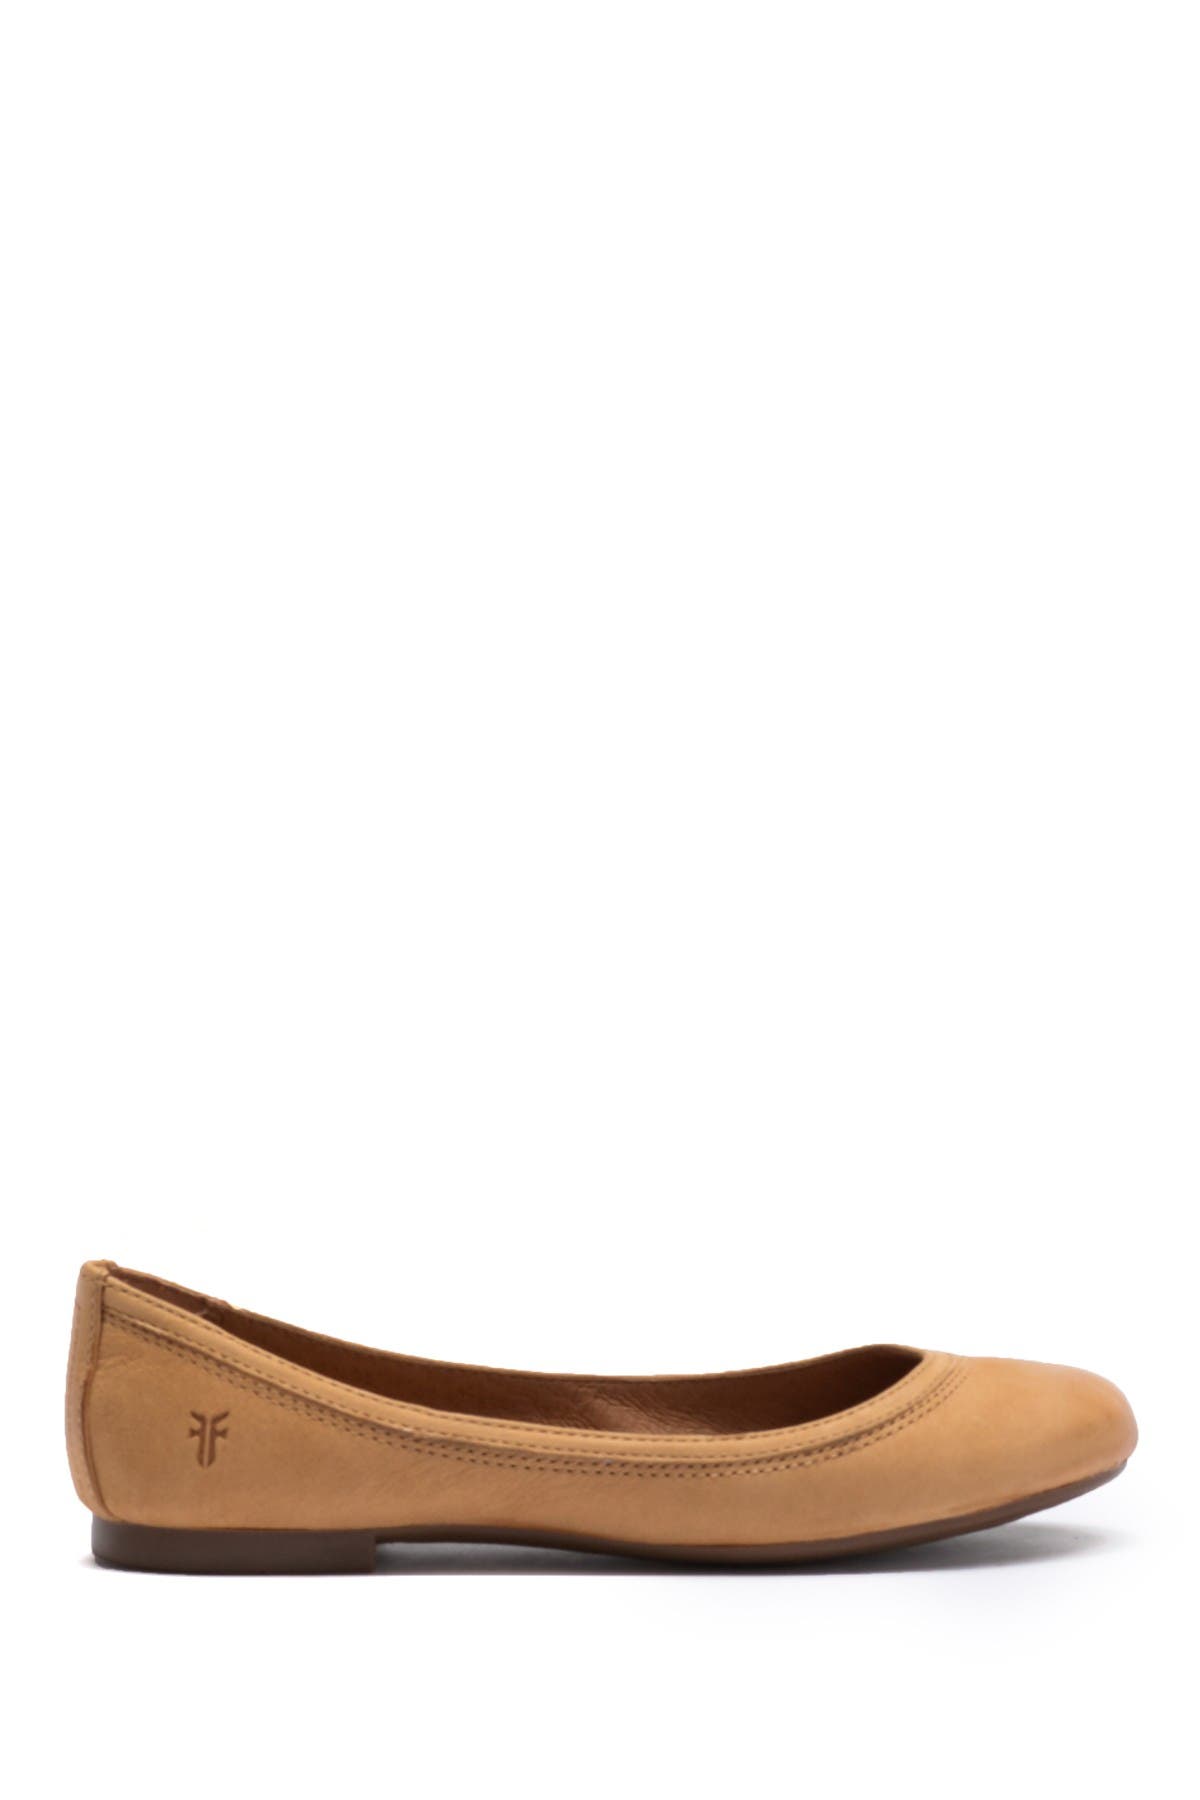 Frye | Carrie Leather Flat | Nordstrom Rack